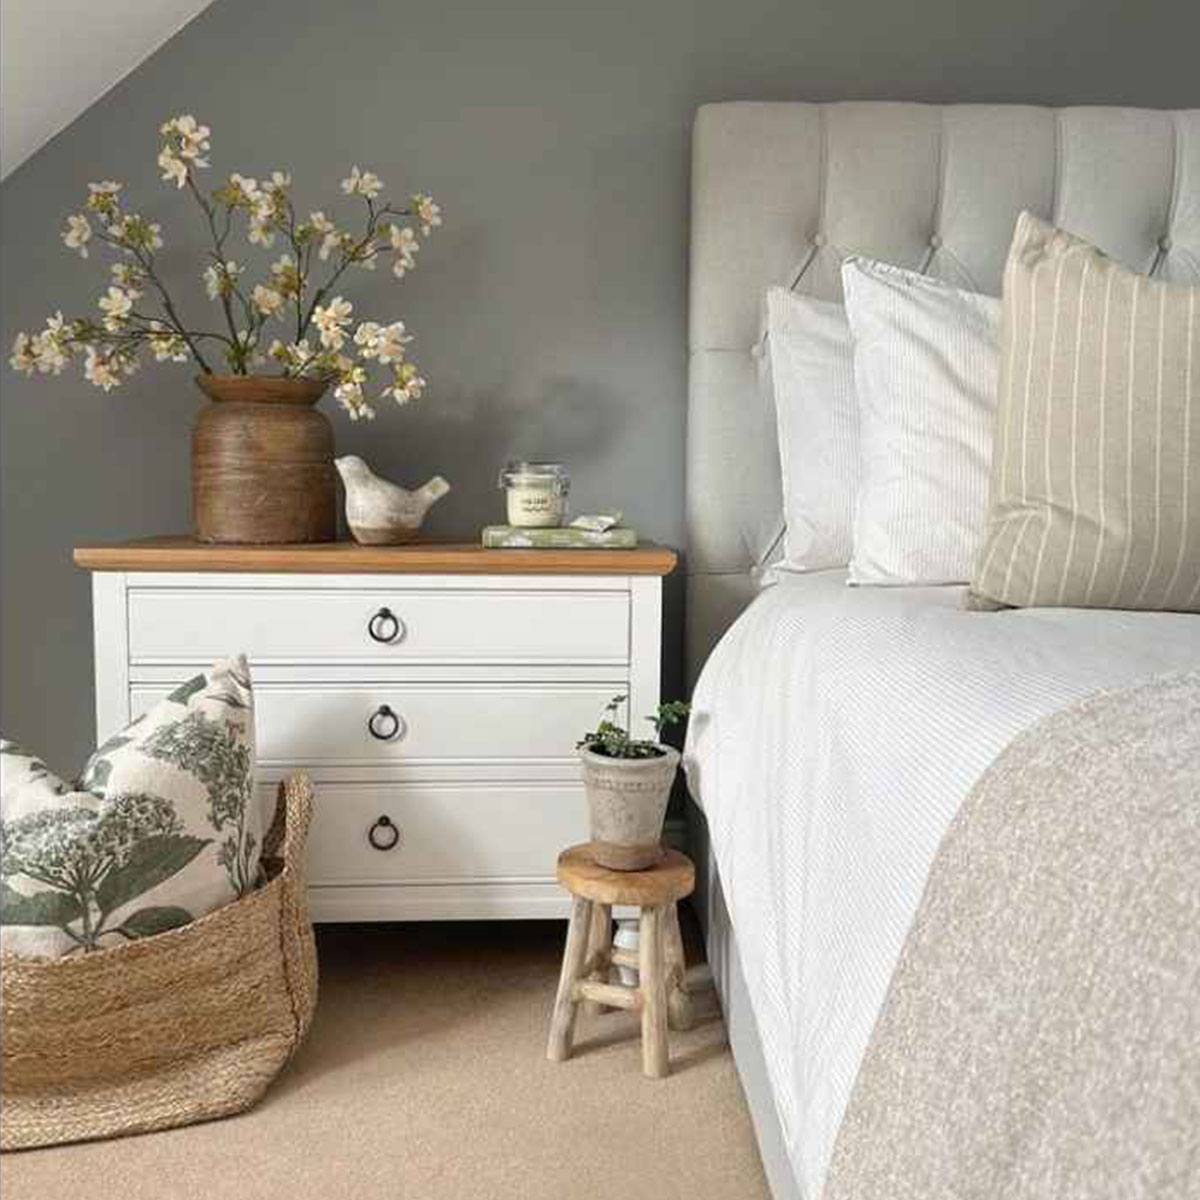 How Tall Should A Nightstand Be? Here’s What 4 Experts Have To Say